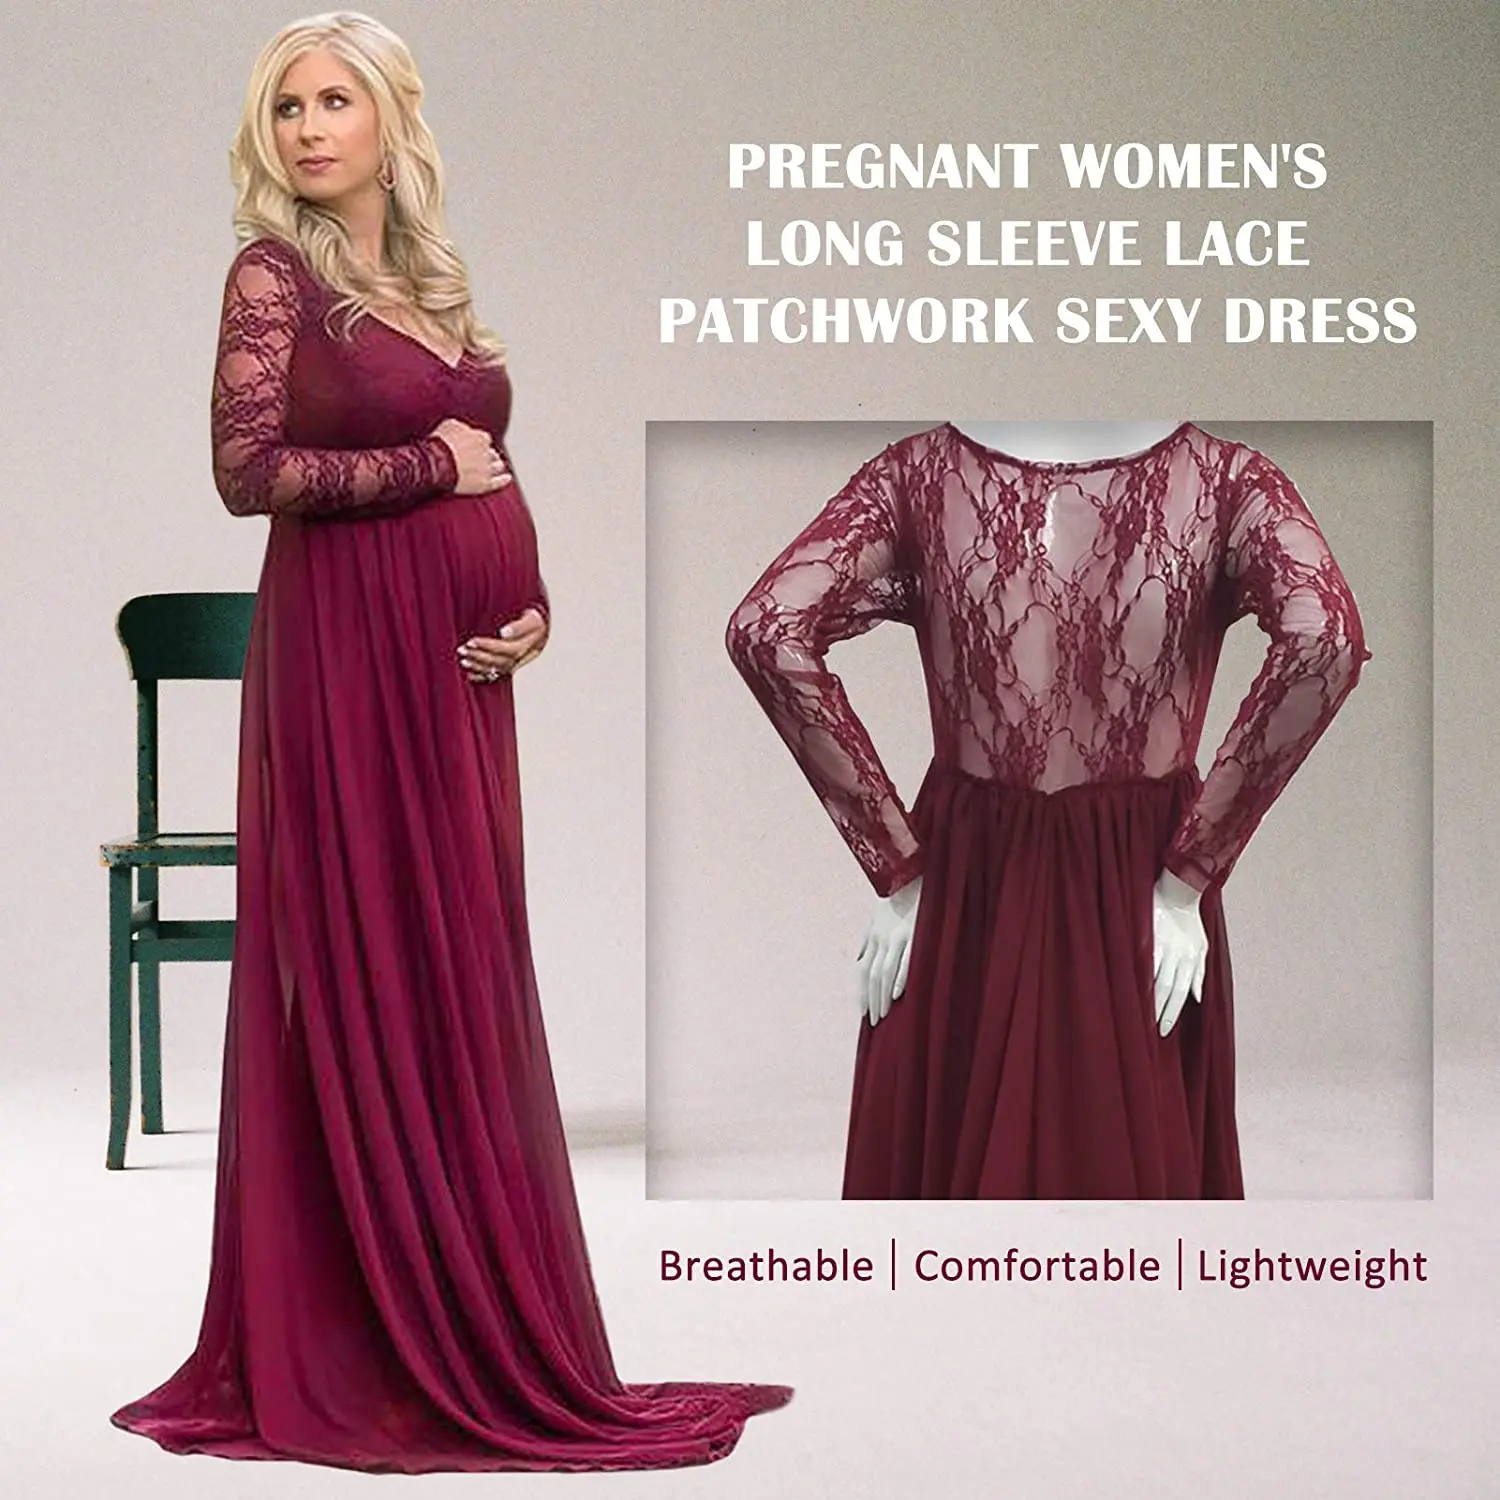 Women Pregnant Dress Lace Maternity V Neck Dress Long Sleeve Photography Props Dress Solid Gown Ladies Trail Photoshoot Dress enlarge